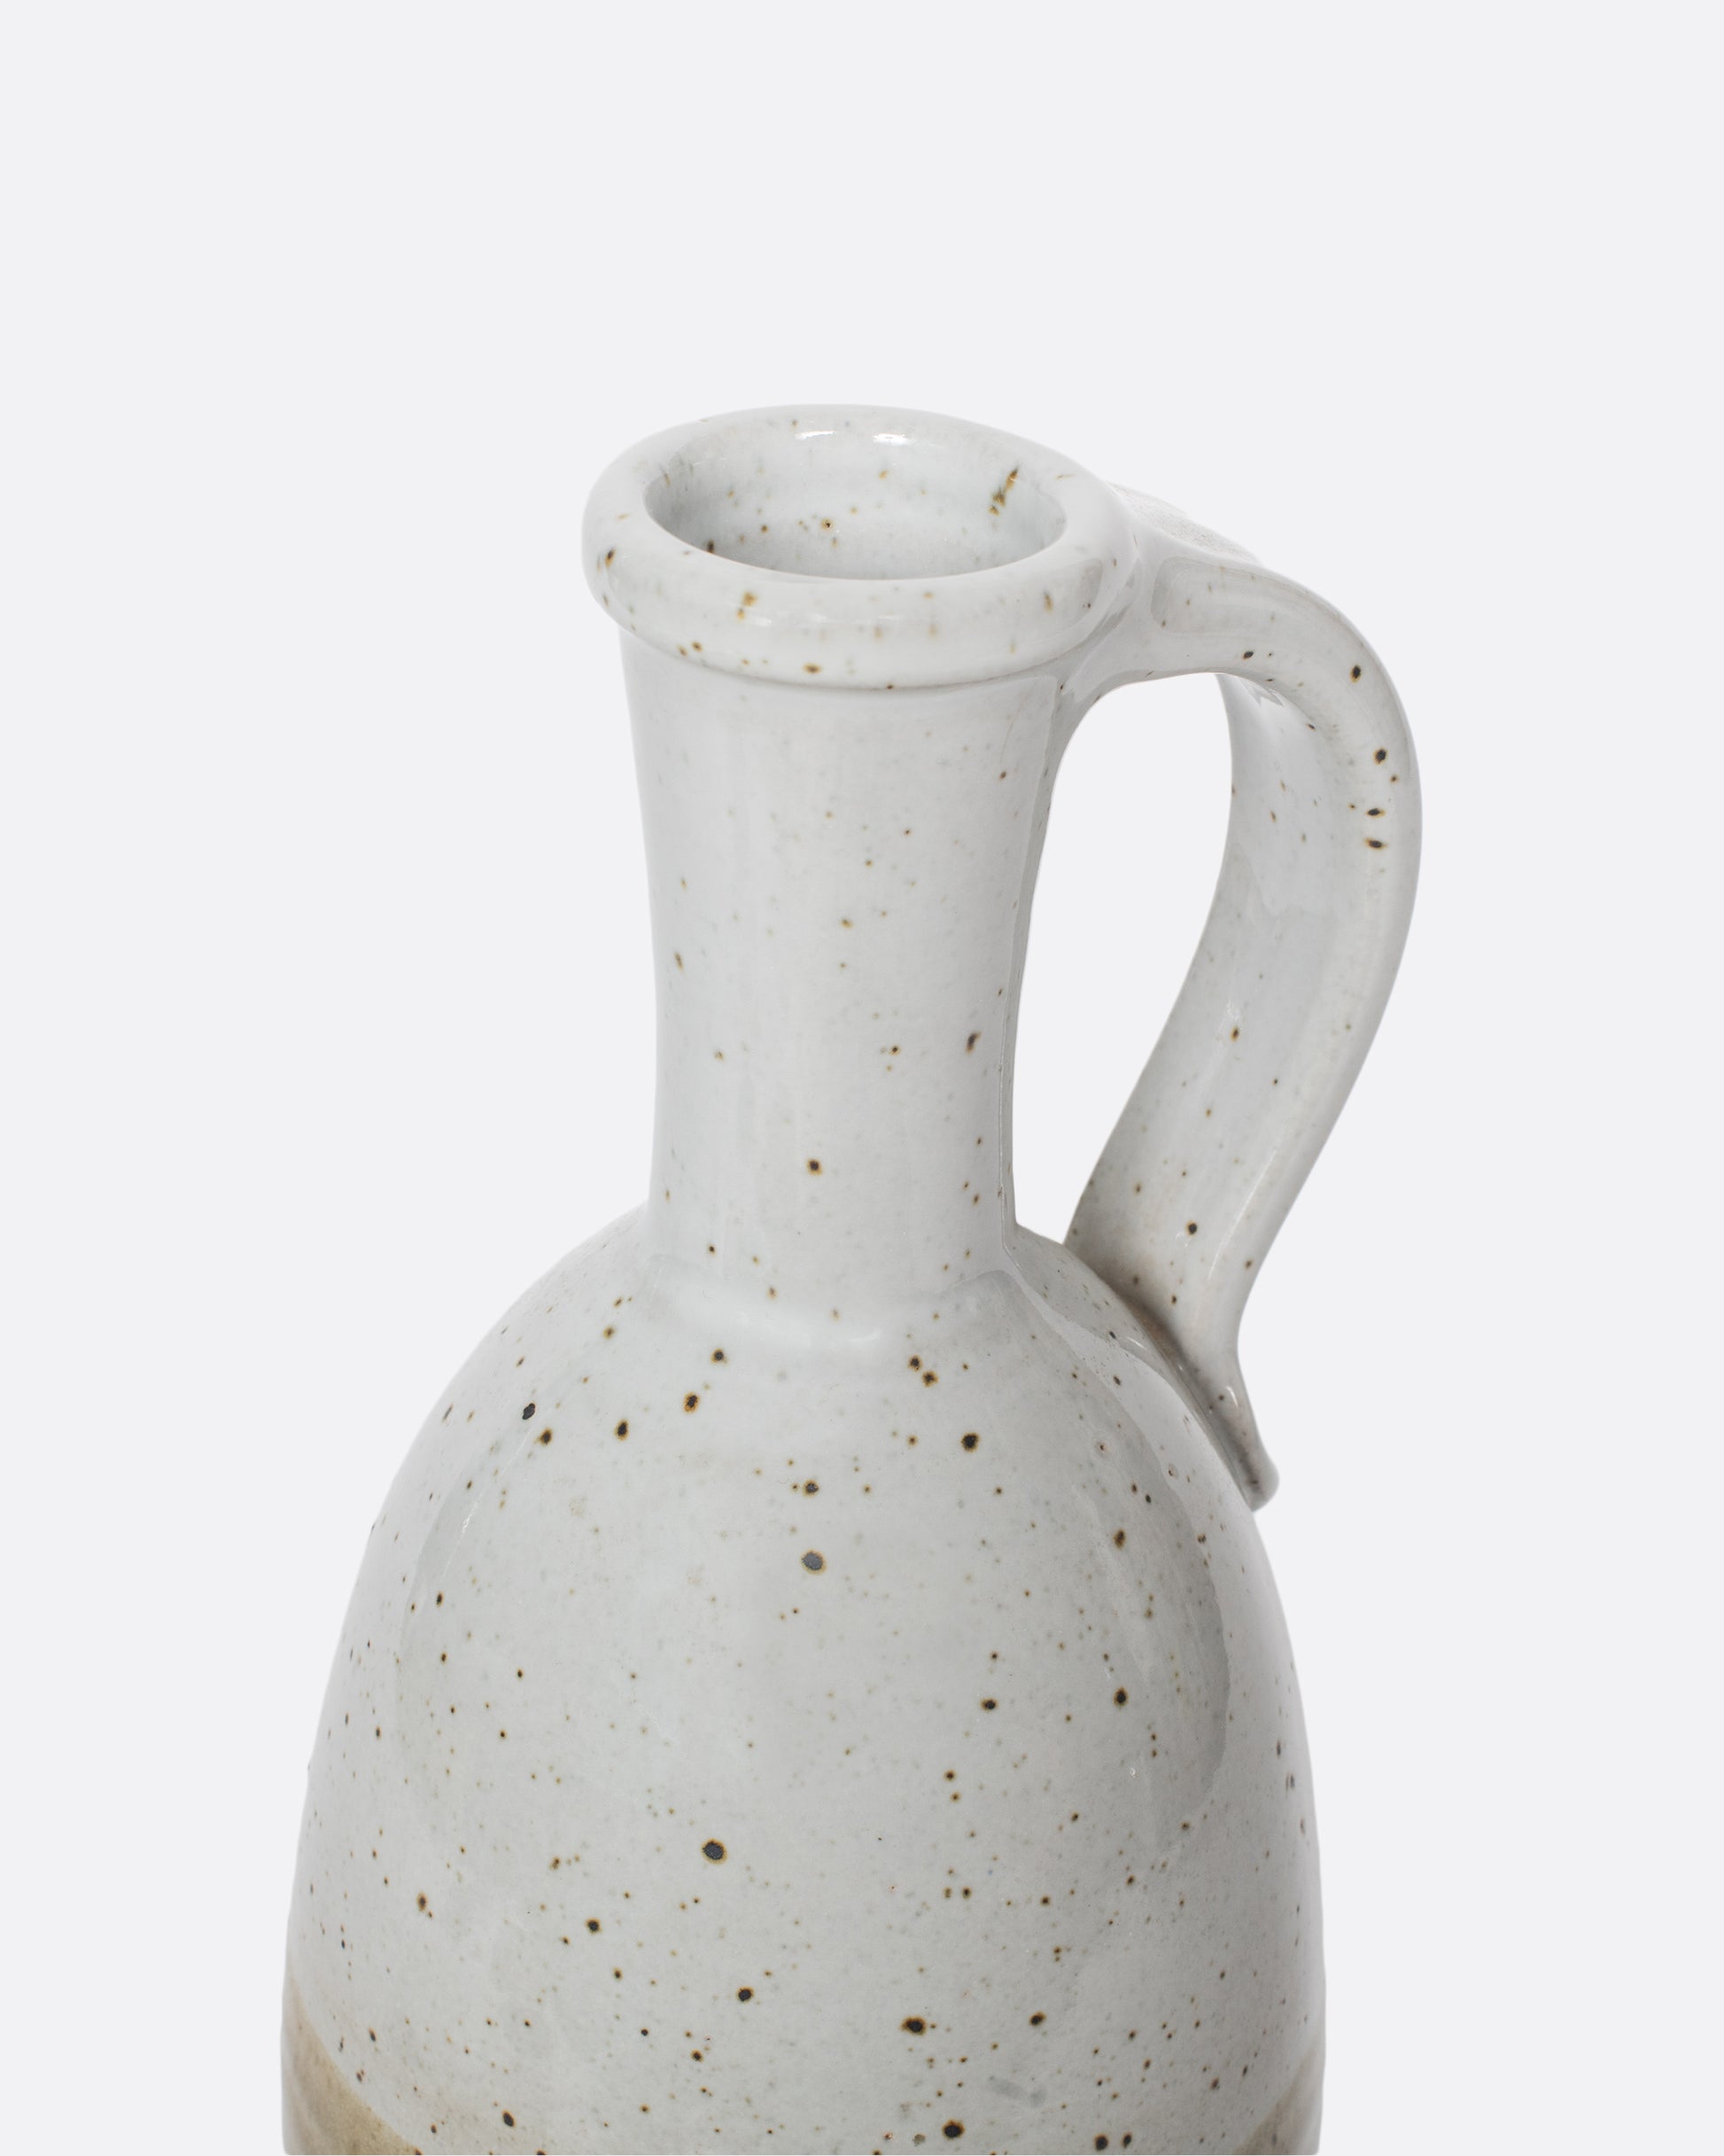 This vintage ceramic wine decanter is glazed with muted earth tones that make sharing a bottle of red an even cozier experience.